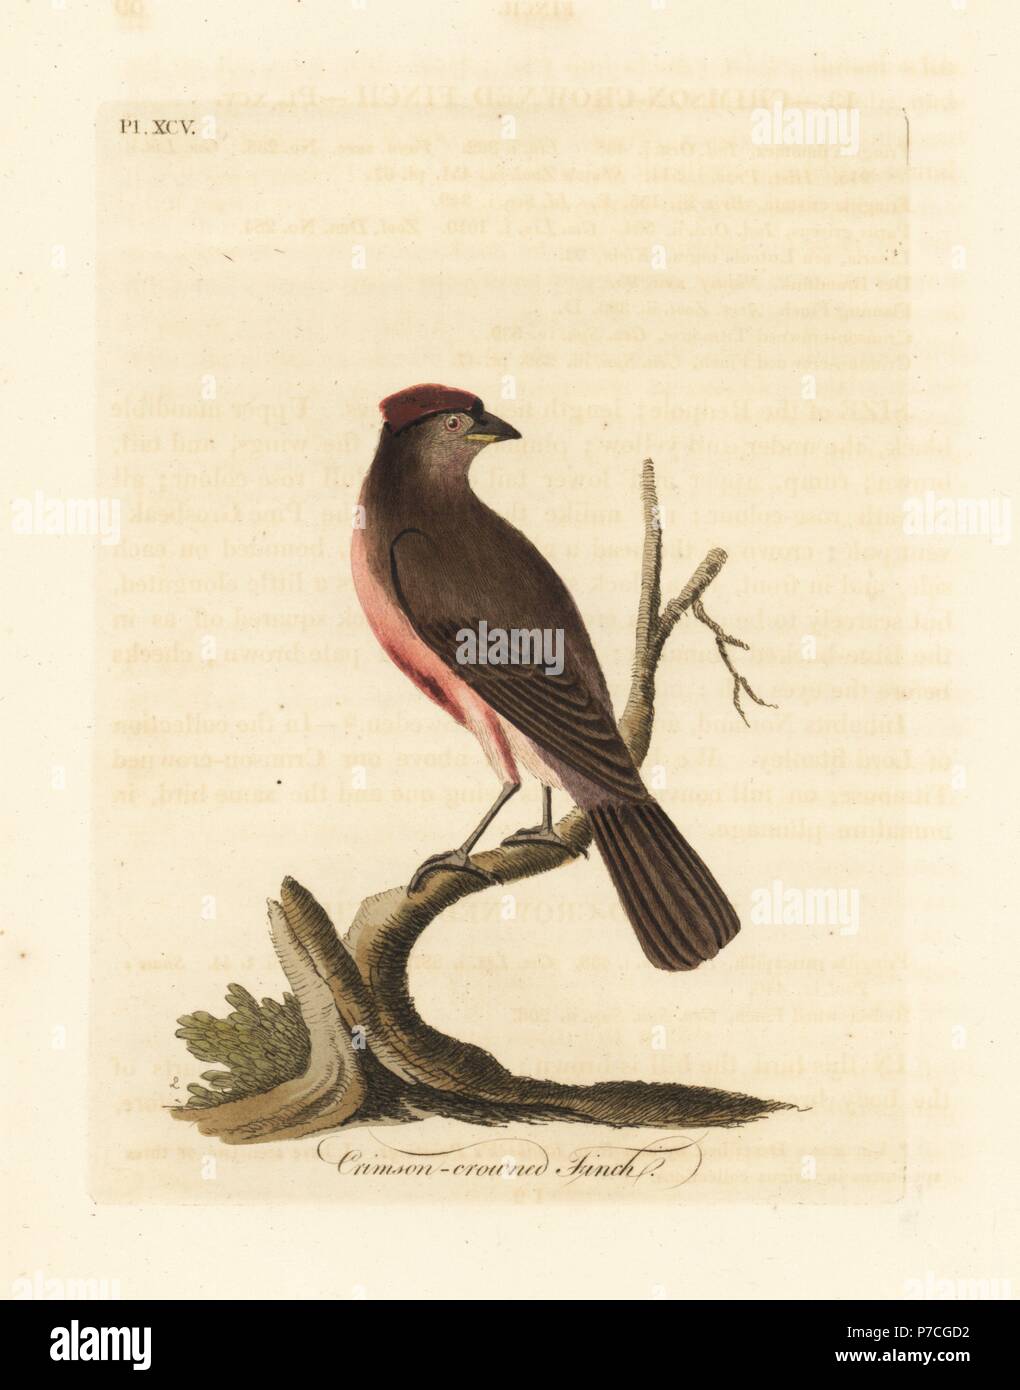 Common redpoll, Carduelis flammea (Crimson-crowned finch, Fringilla flammea). Handcoloured copperplate drawn and engraved by John Latham from his own A General History of Birds, Winchester, 1823. Stock Photo